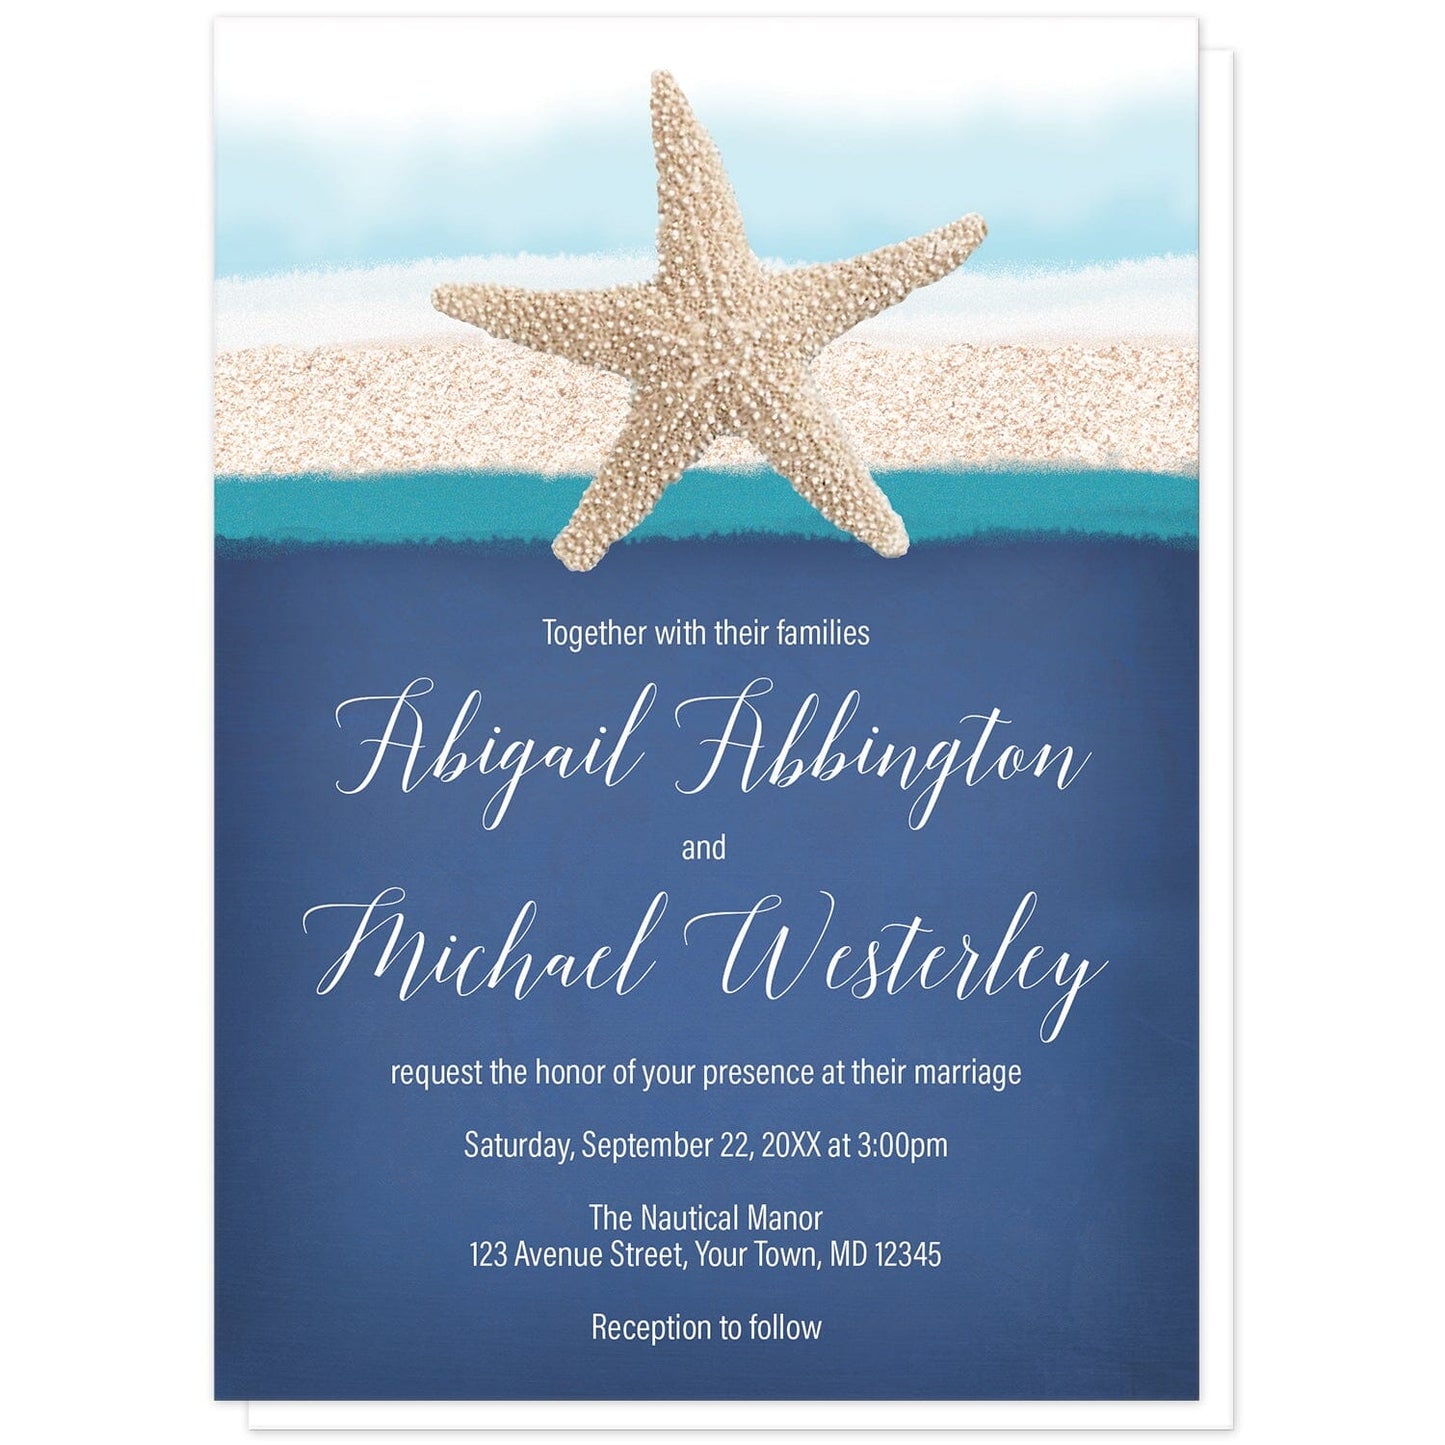 Starfish Navy Blue Teal Beach Wedding Invitations at Artistically Invited. Starfish navy blue teal beach wedding invitations with a starfish image over a rough watercolor and sand stripe illustration in white, blue, beige, and teal along the top. Your personalized marriage celebration details are custom printed in white over a rough navy blue background design below the sea star.